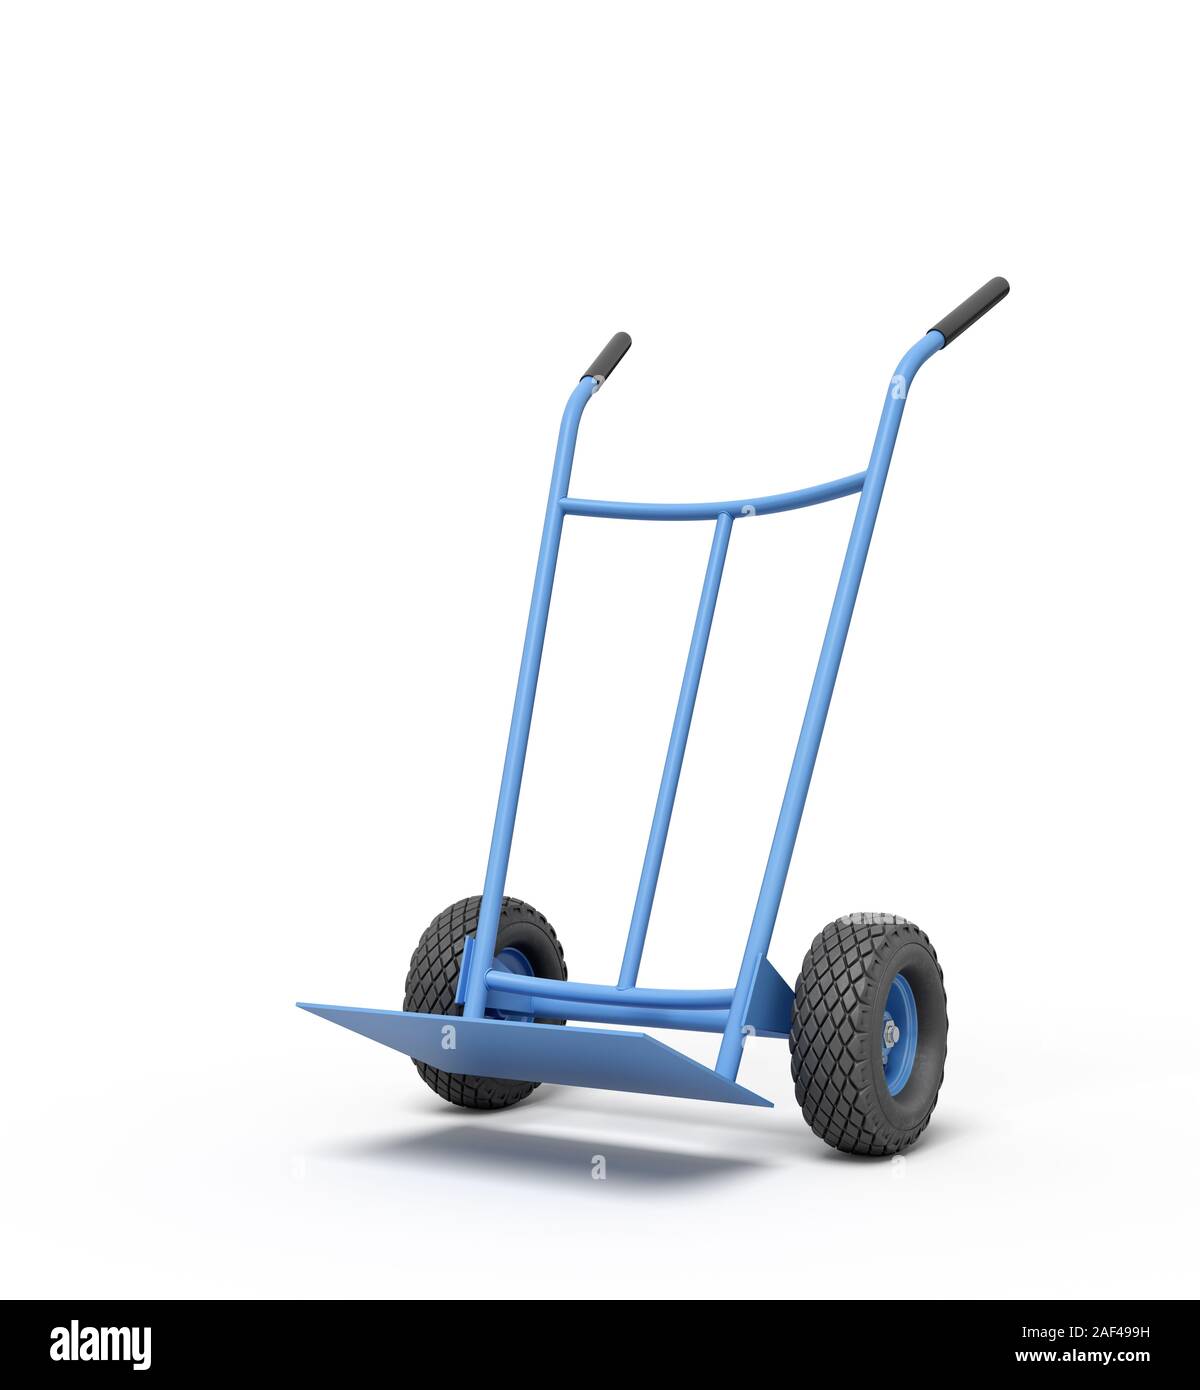 3d rendering of blue empty hand truck standing upright in half-turn. Gardening equipment. Material handling. Moving supplies. Stock Photo